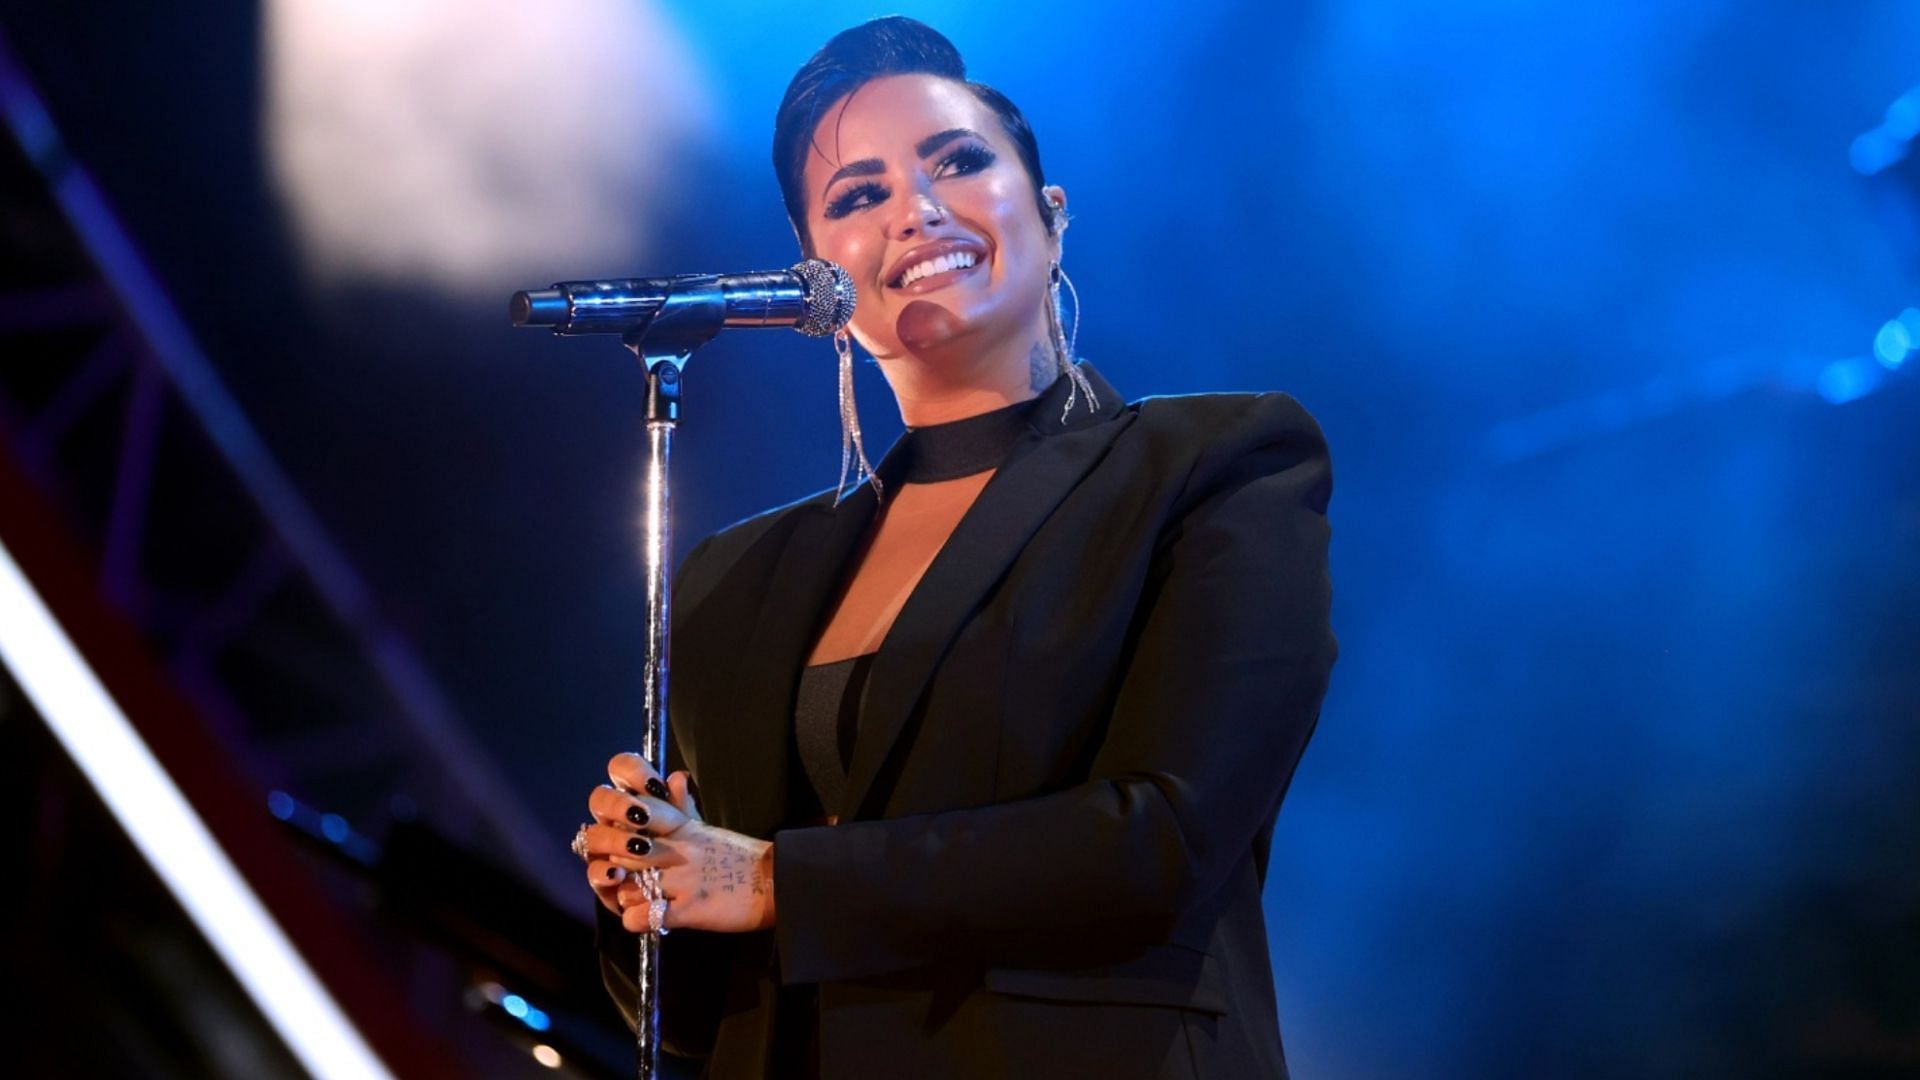 I can't do this anymore": Demi Lovato says she plans to quit touring after Holy Fvck trek